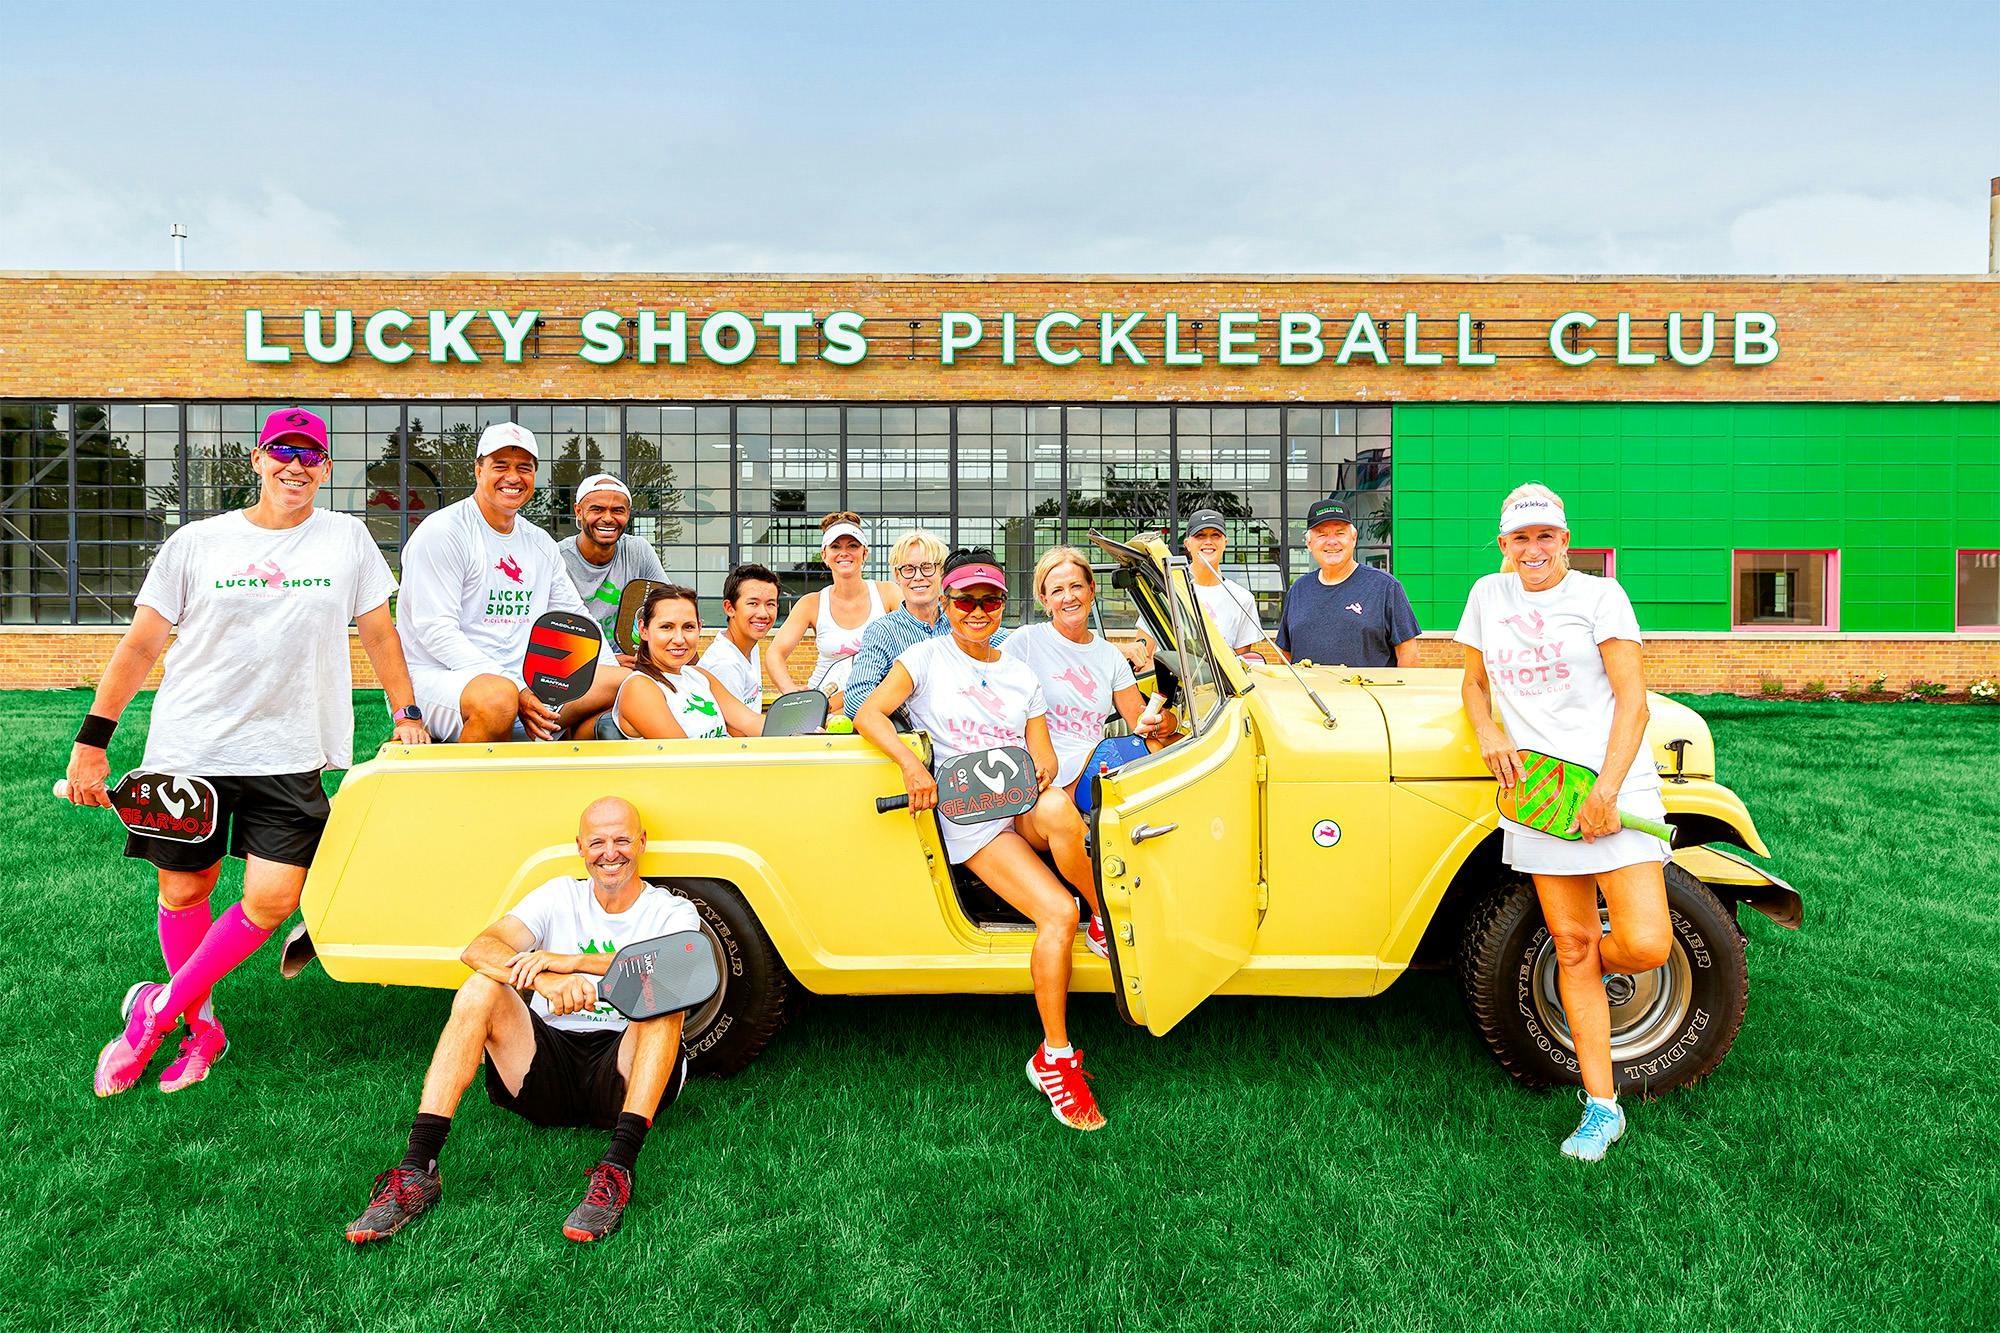 Image 4 of 5 of Lucky Shots Pickleball Club court